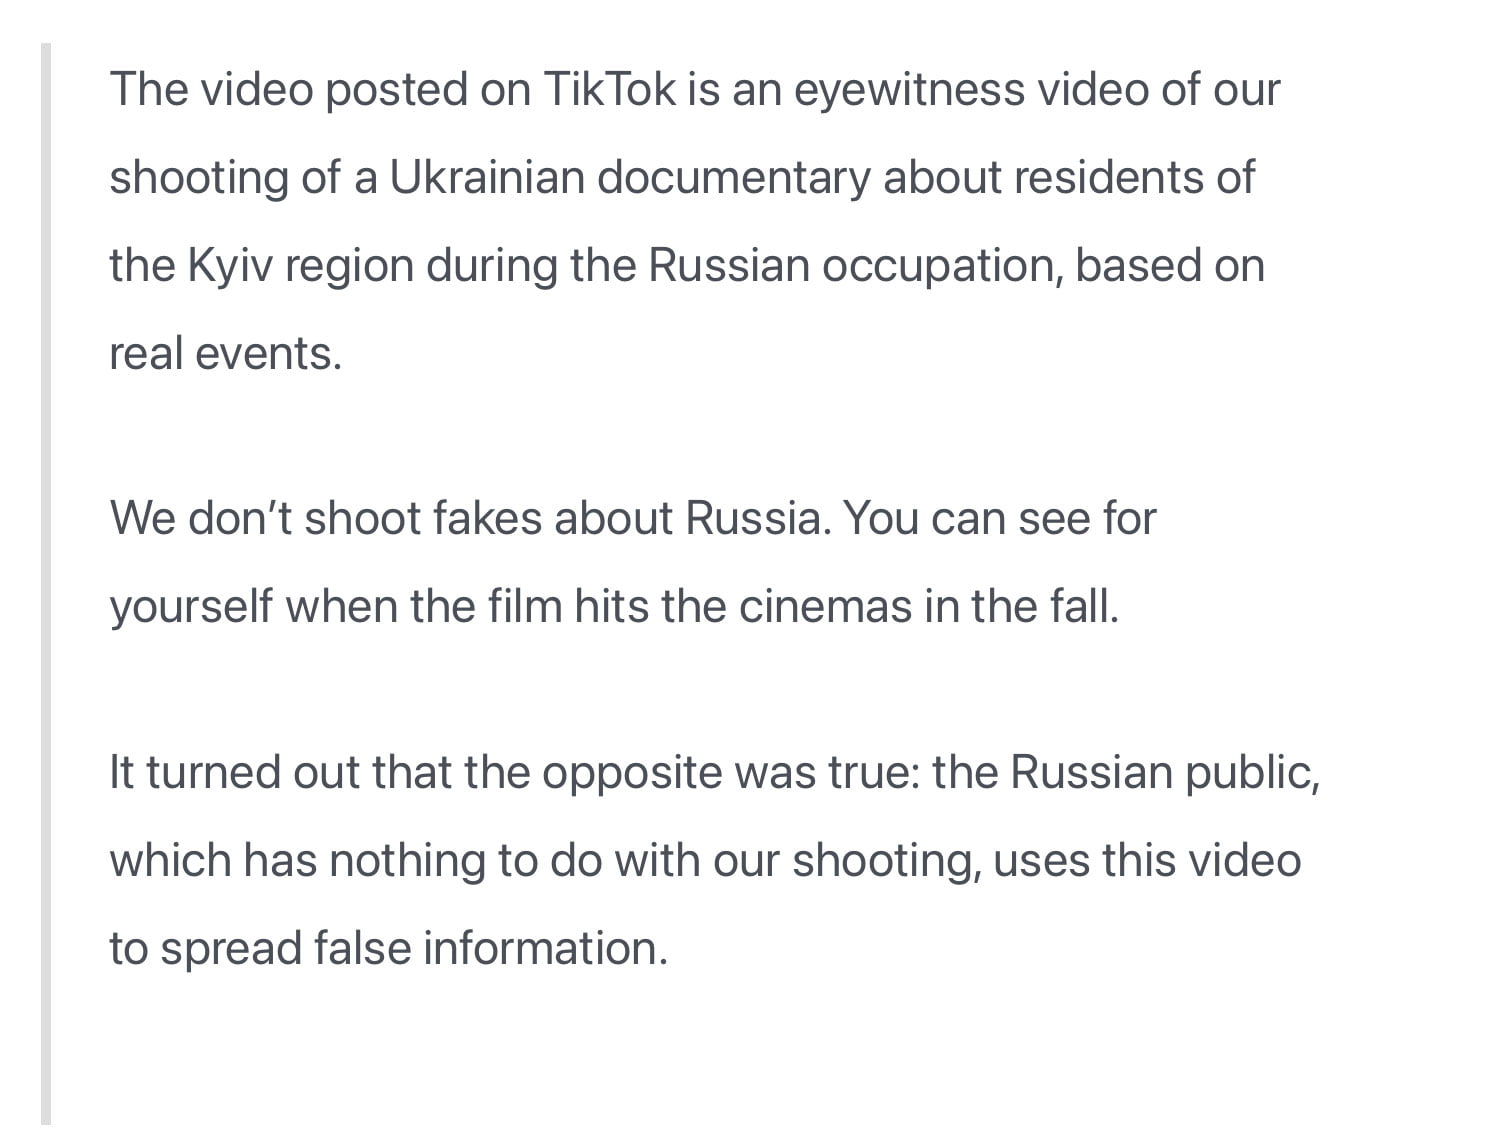 Russian propaganda uses footage from a film set to spread disinformation - Creators Statement